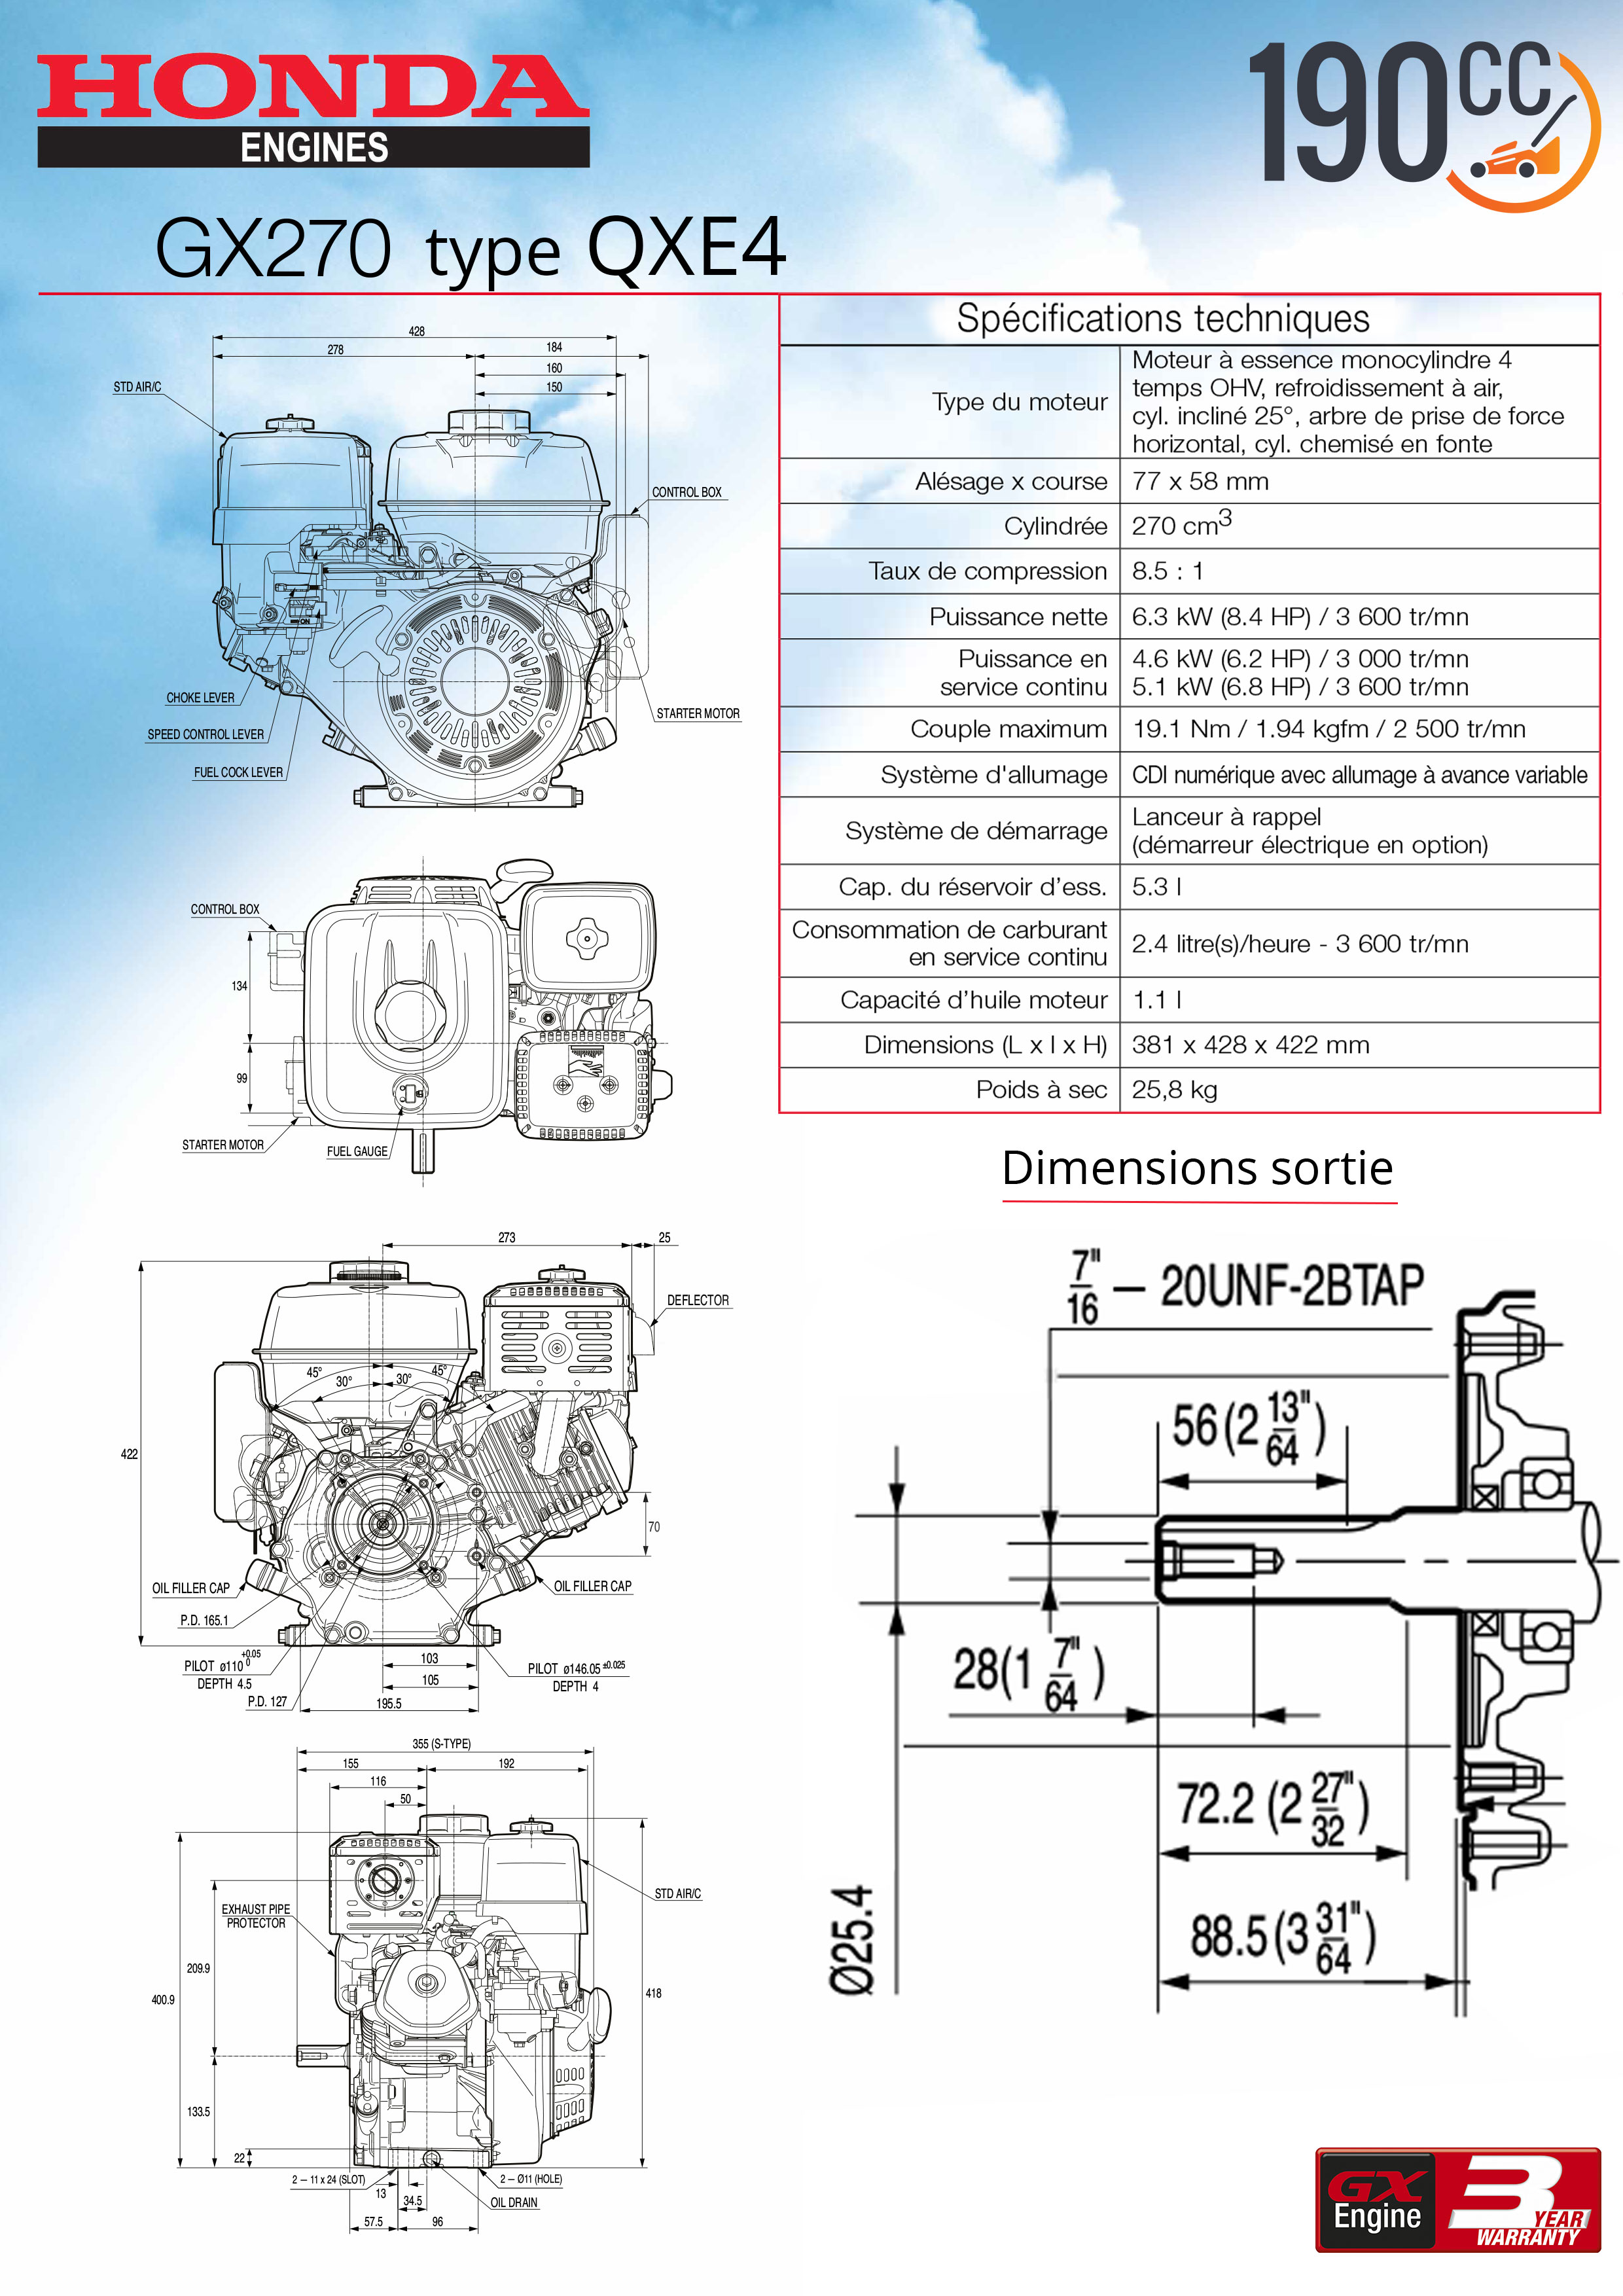 Specifications GX270 QXE4